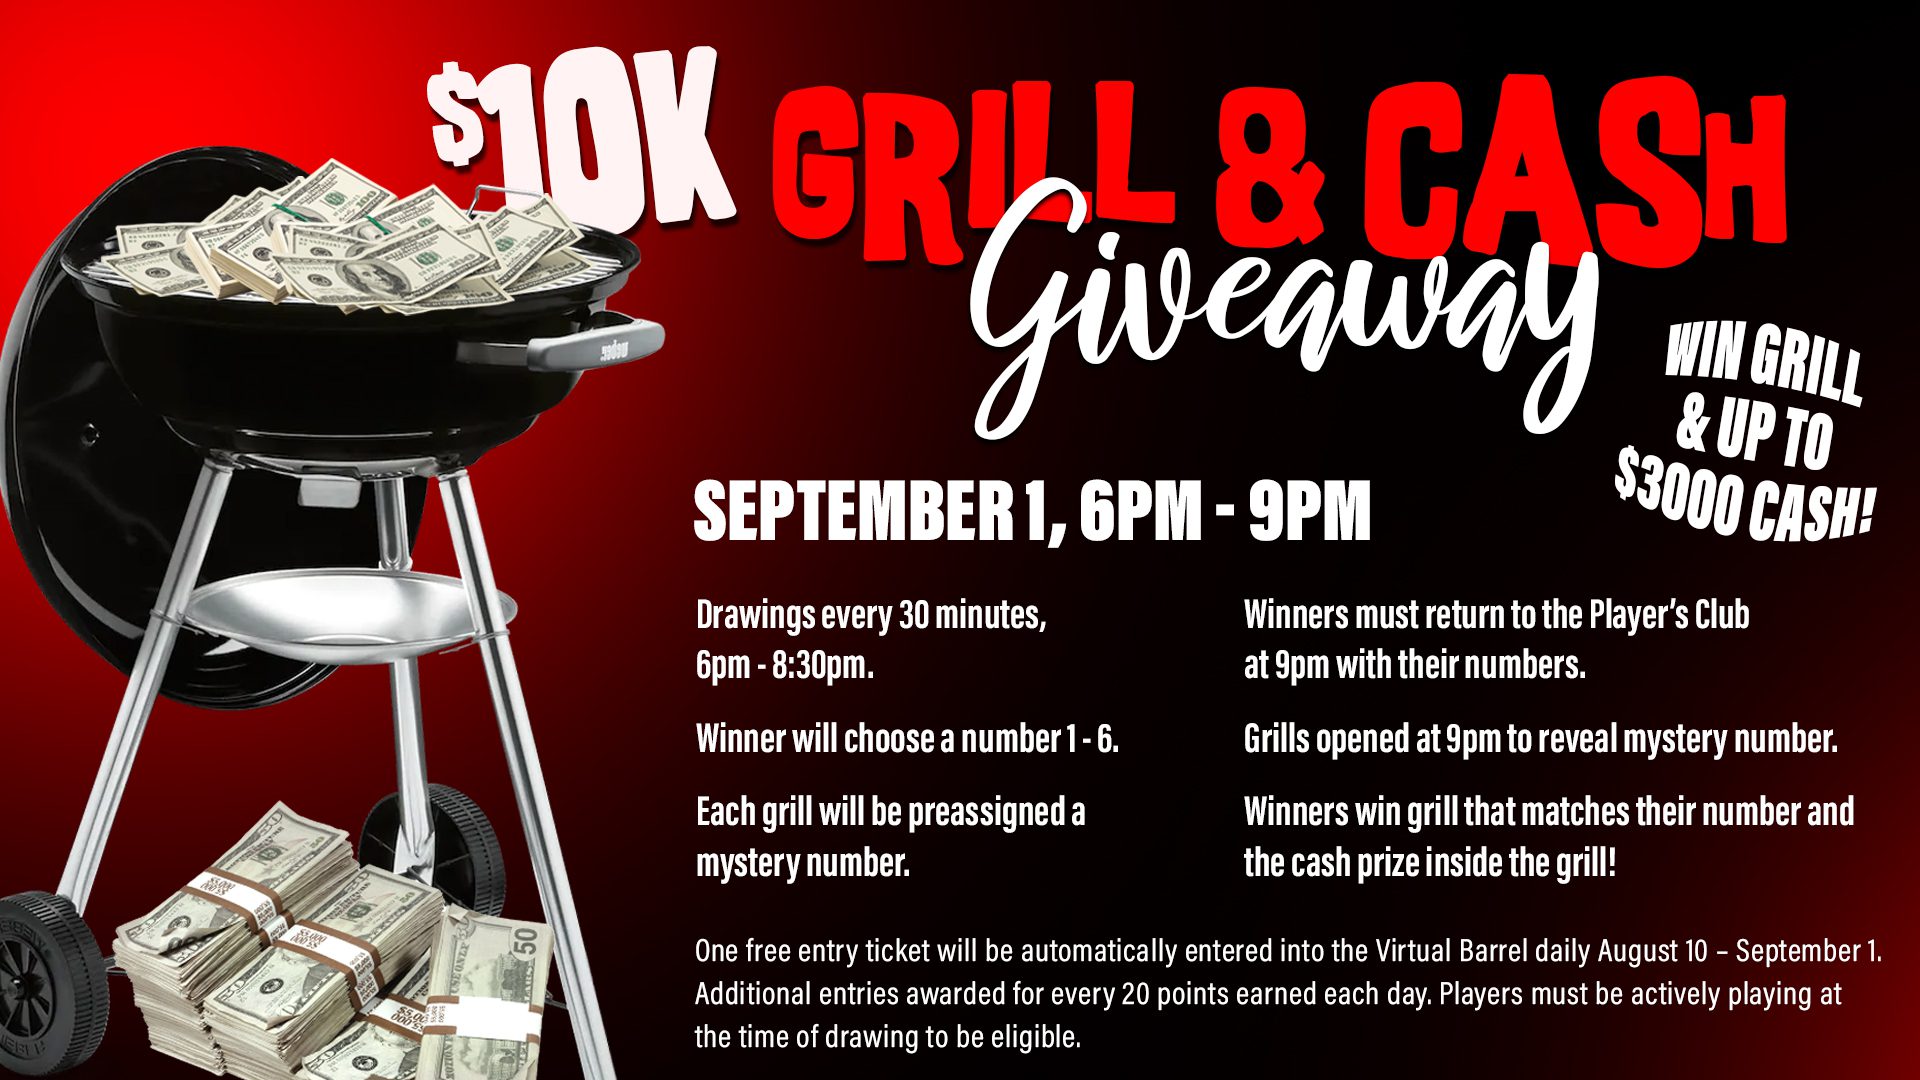 A grill and cash giveaway is coming up on september 1 st.